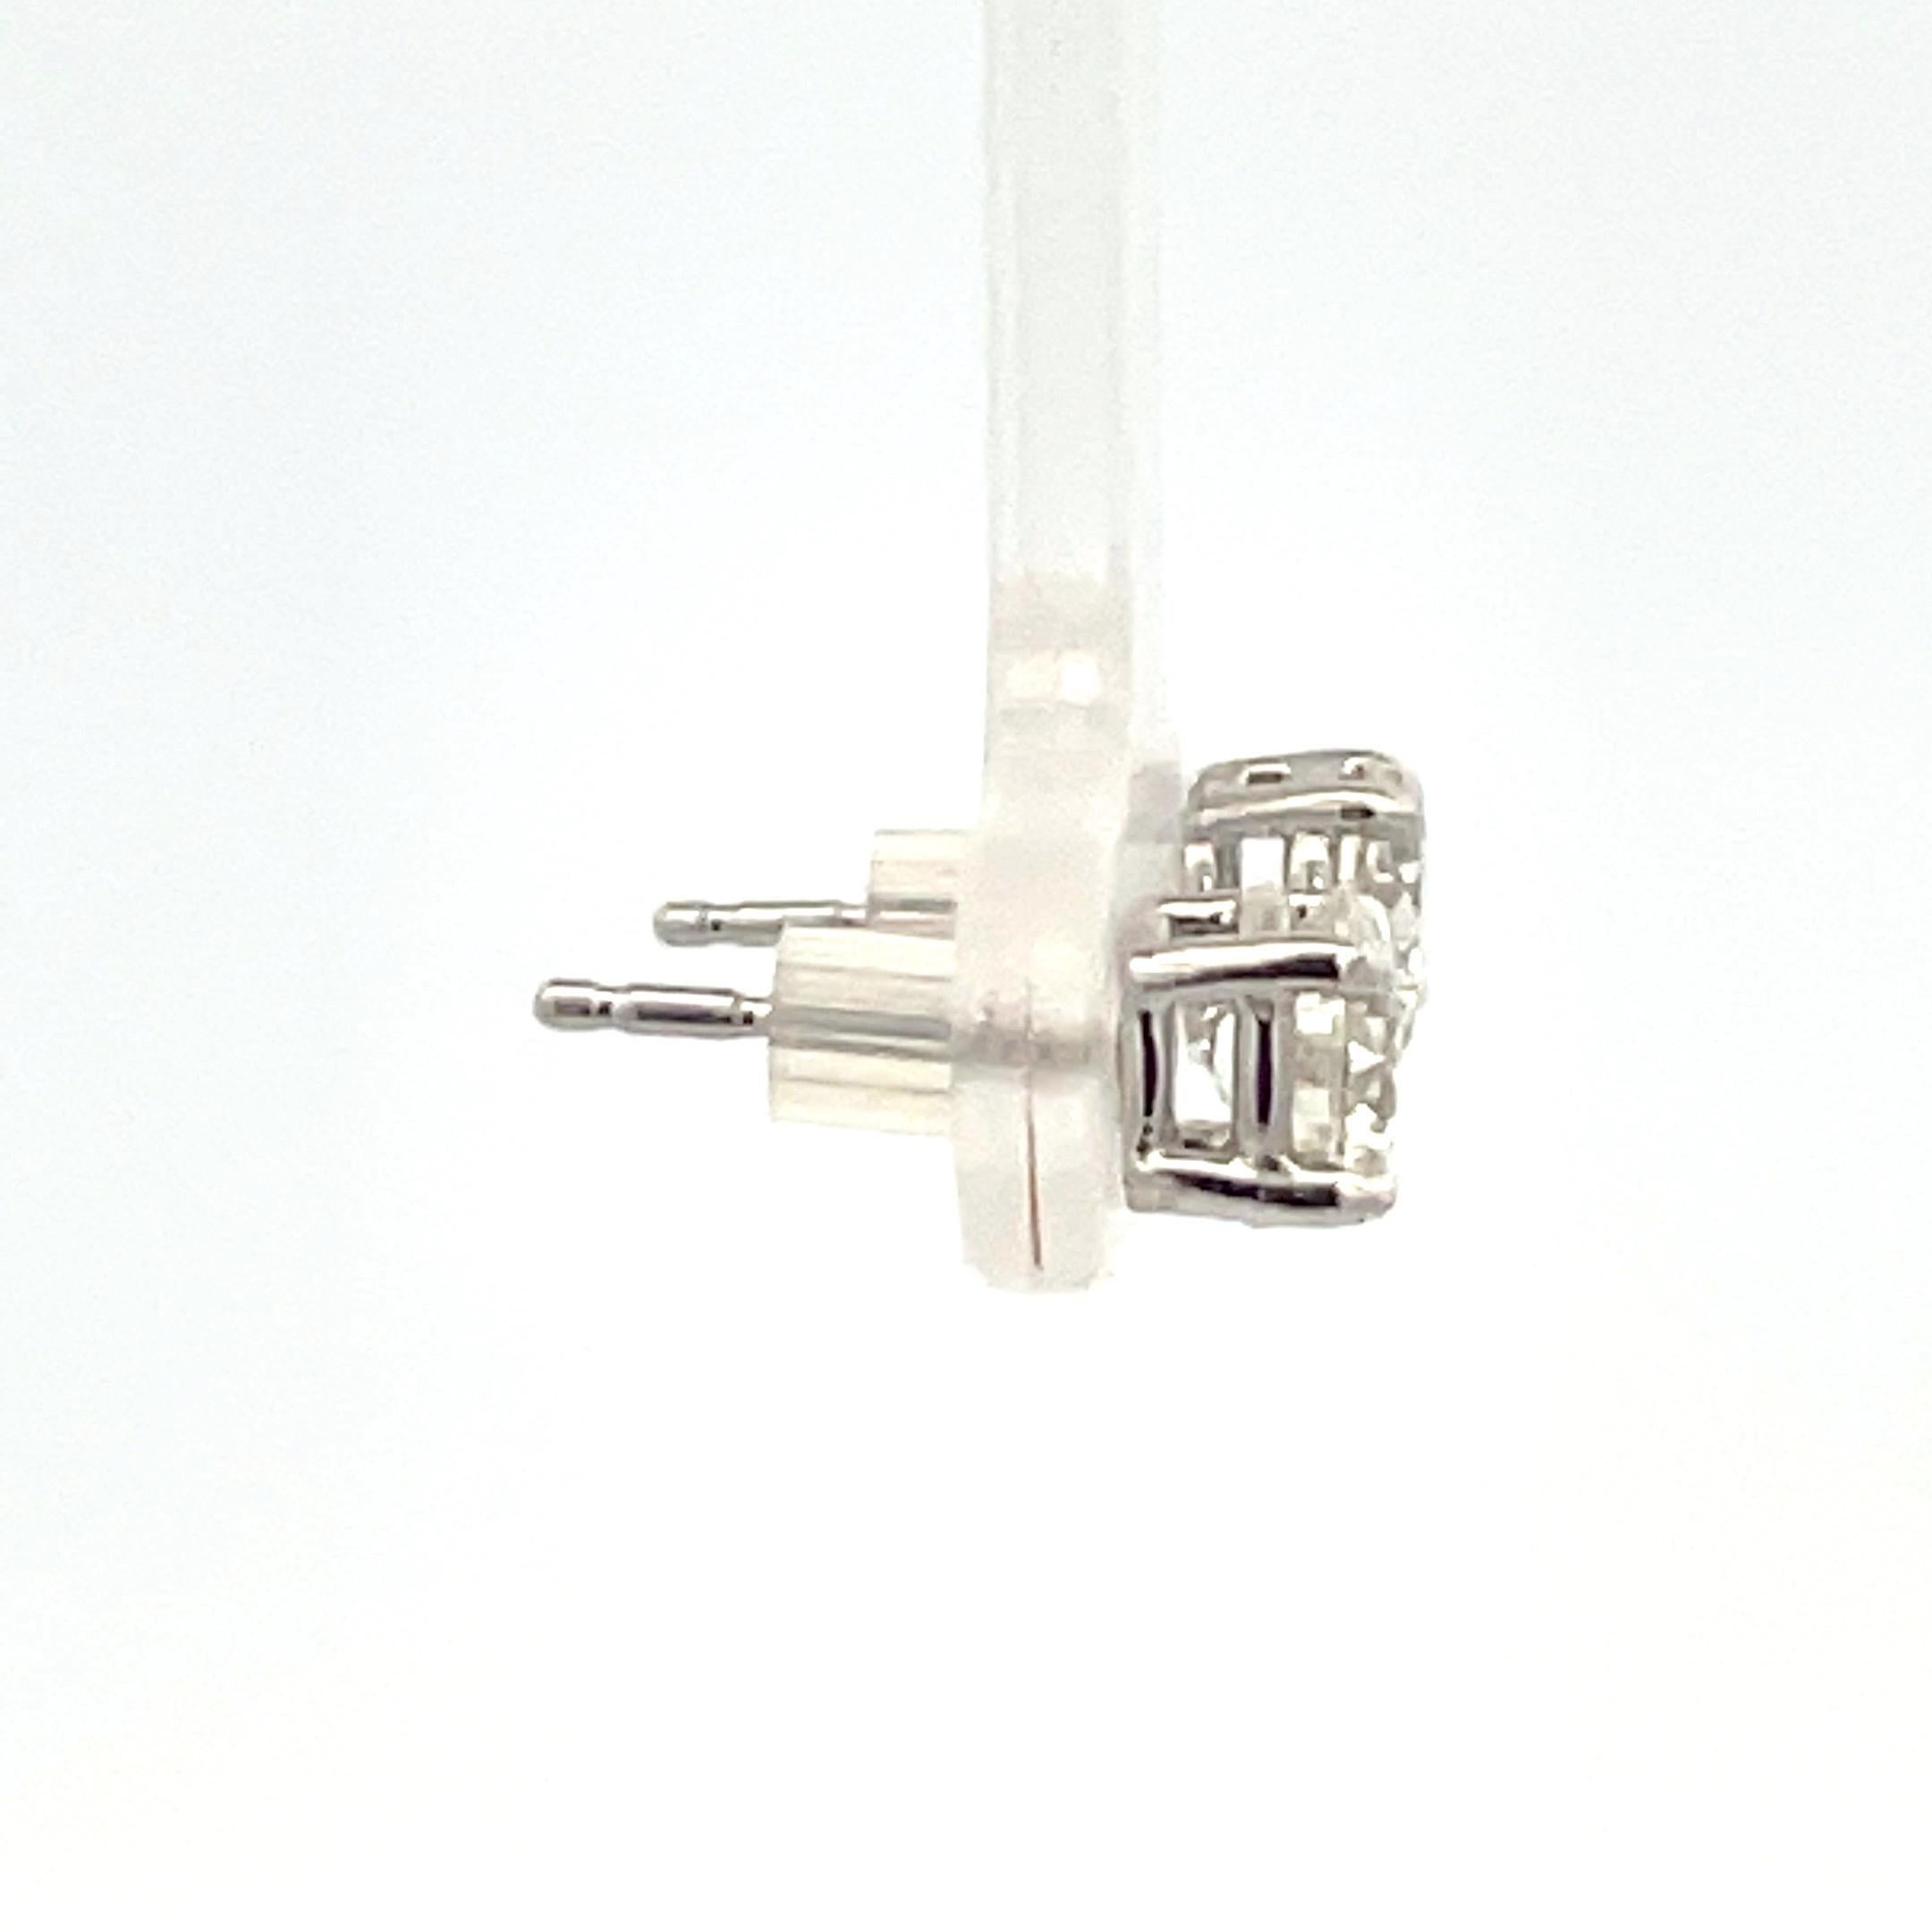 Diamond stud earrings weighing 1.13 Carats in a 4 prong basket setting, 14 Karat White Gold.
Color K-L
Clarity I1

Comments: Nice Life, Eye Clean 

Setting can be changed to a Basket, Martini or Champagne/ 3 or 4 Prong/ 14 or 18 Karat.

DM for more